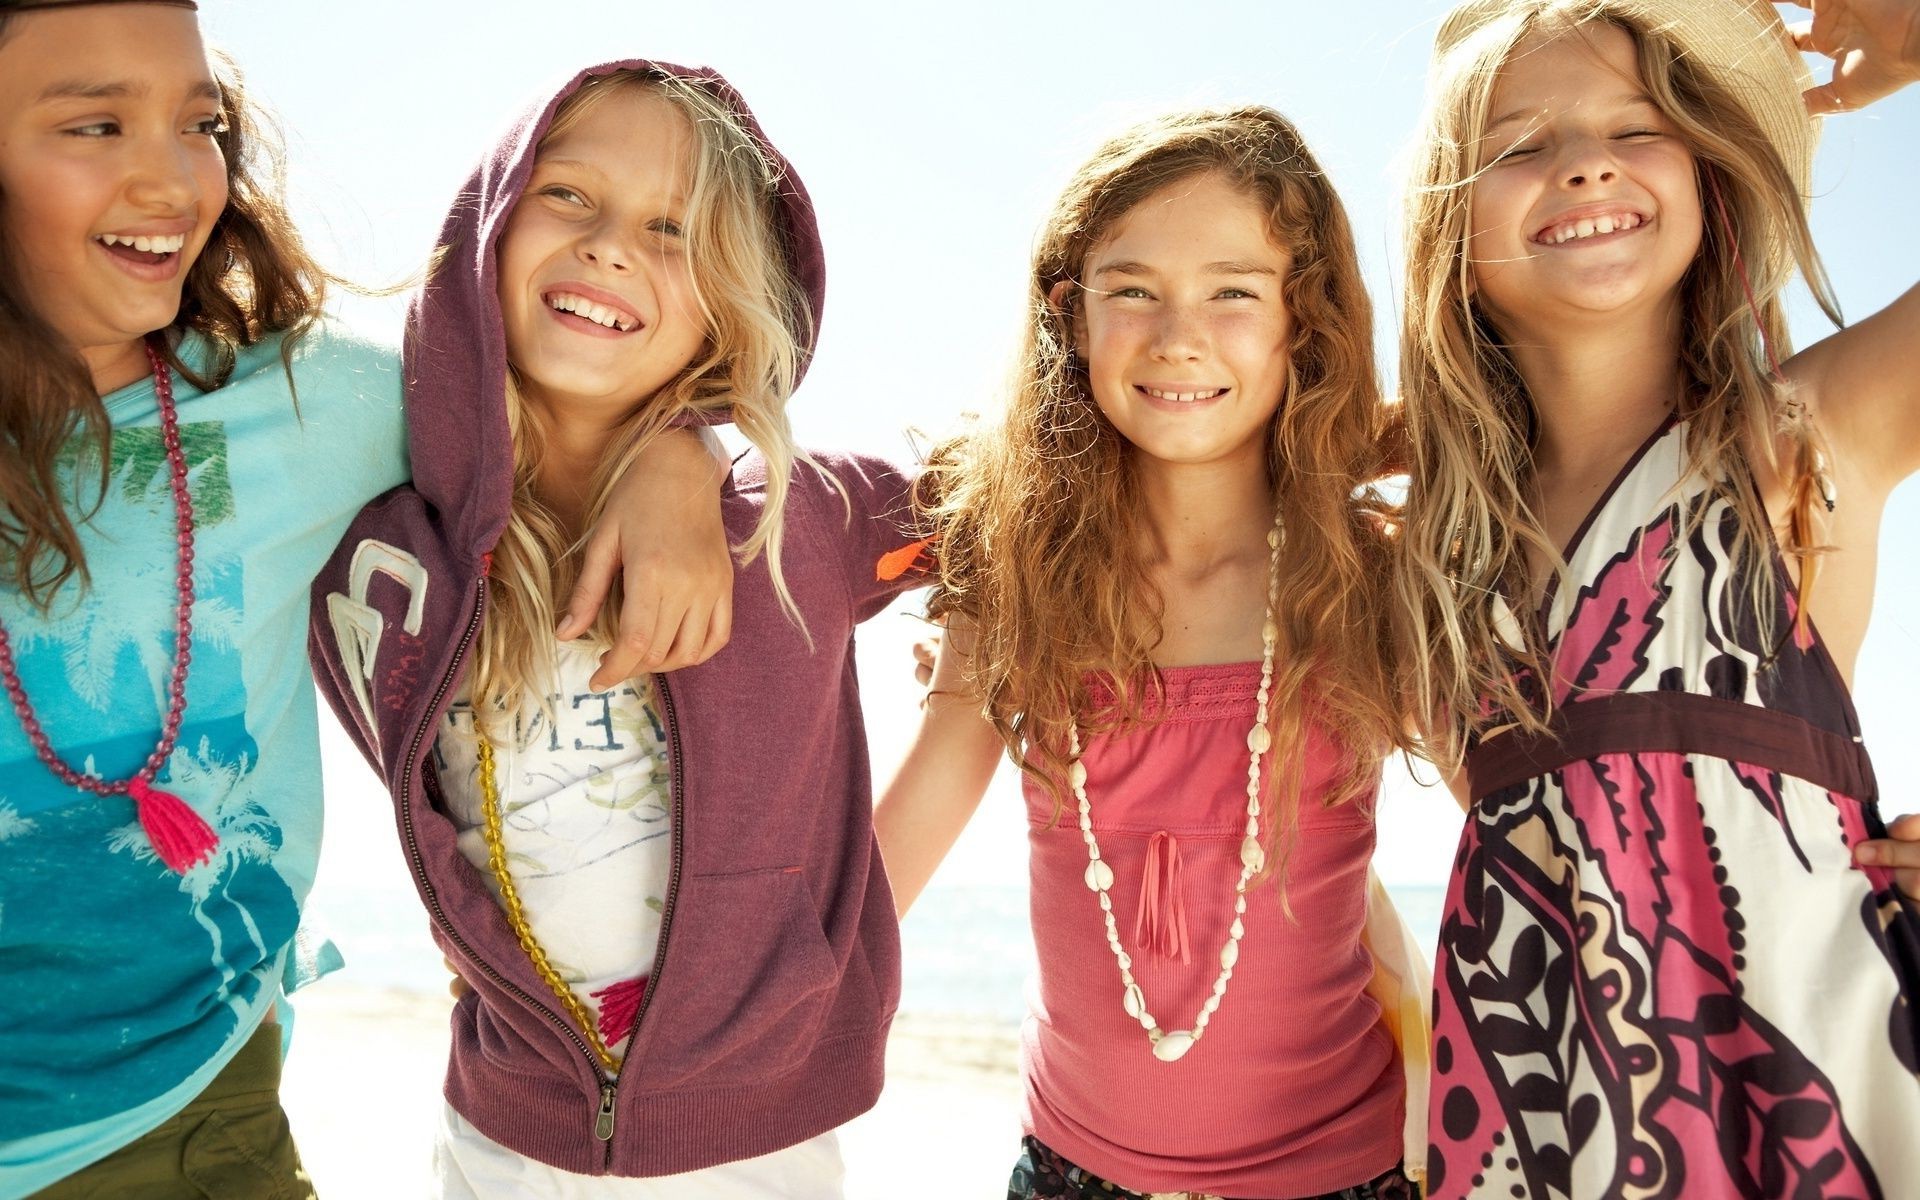 laughing children friendship fun child woman togetherness laughing joy adolescent happiness enjoyment girl summer